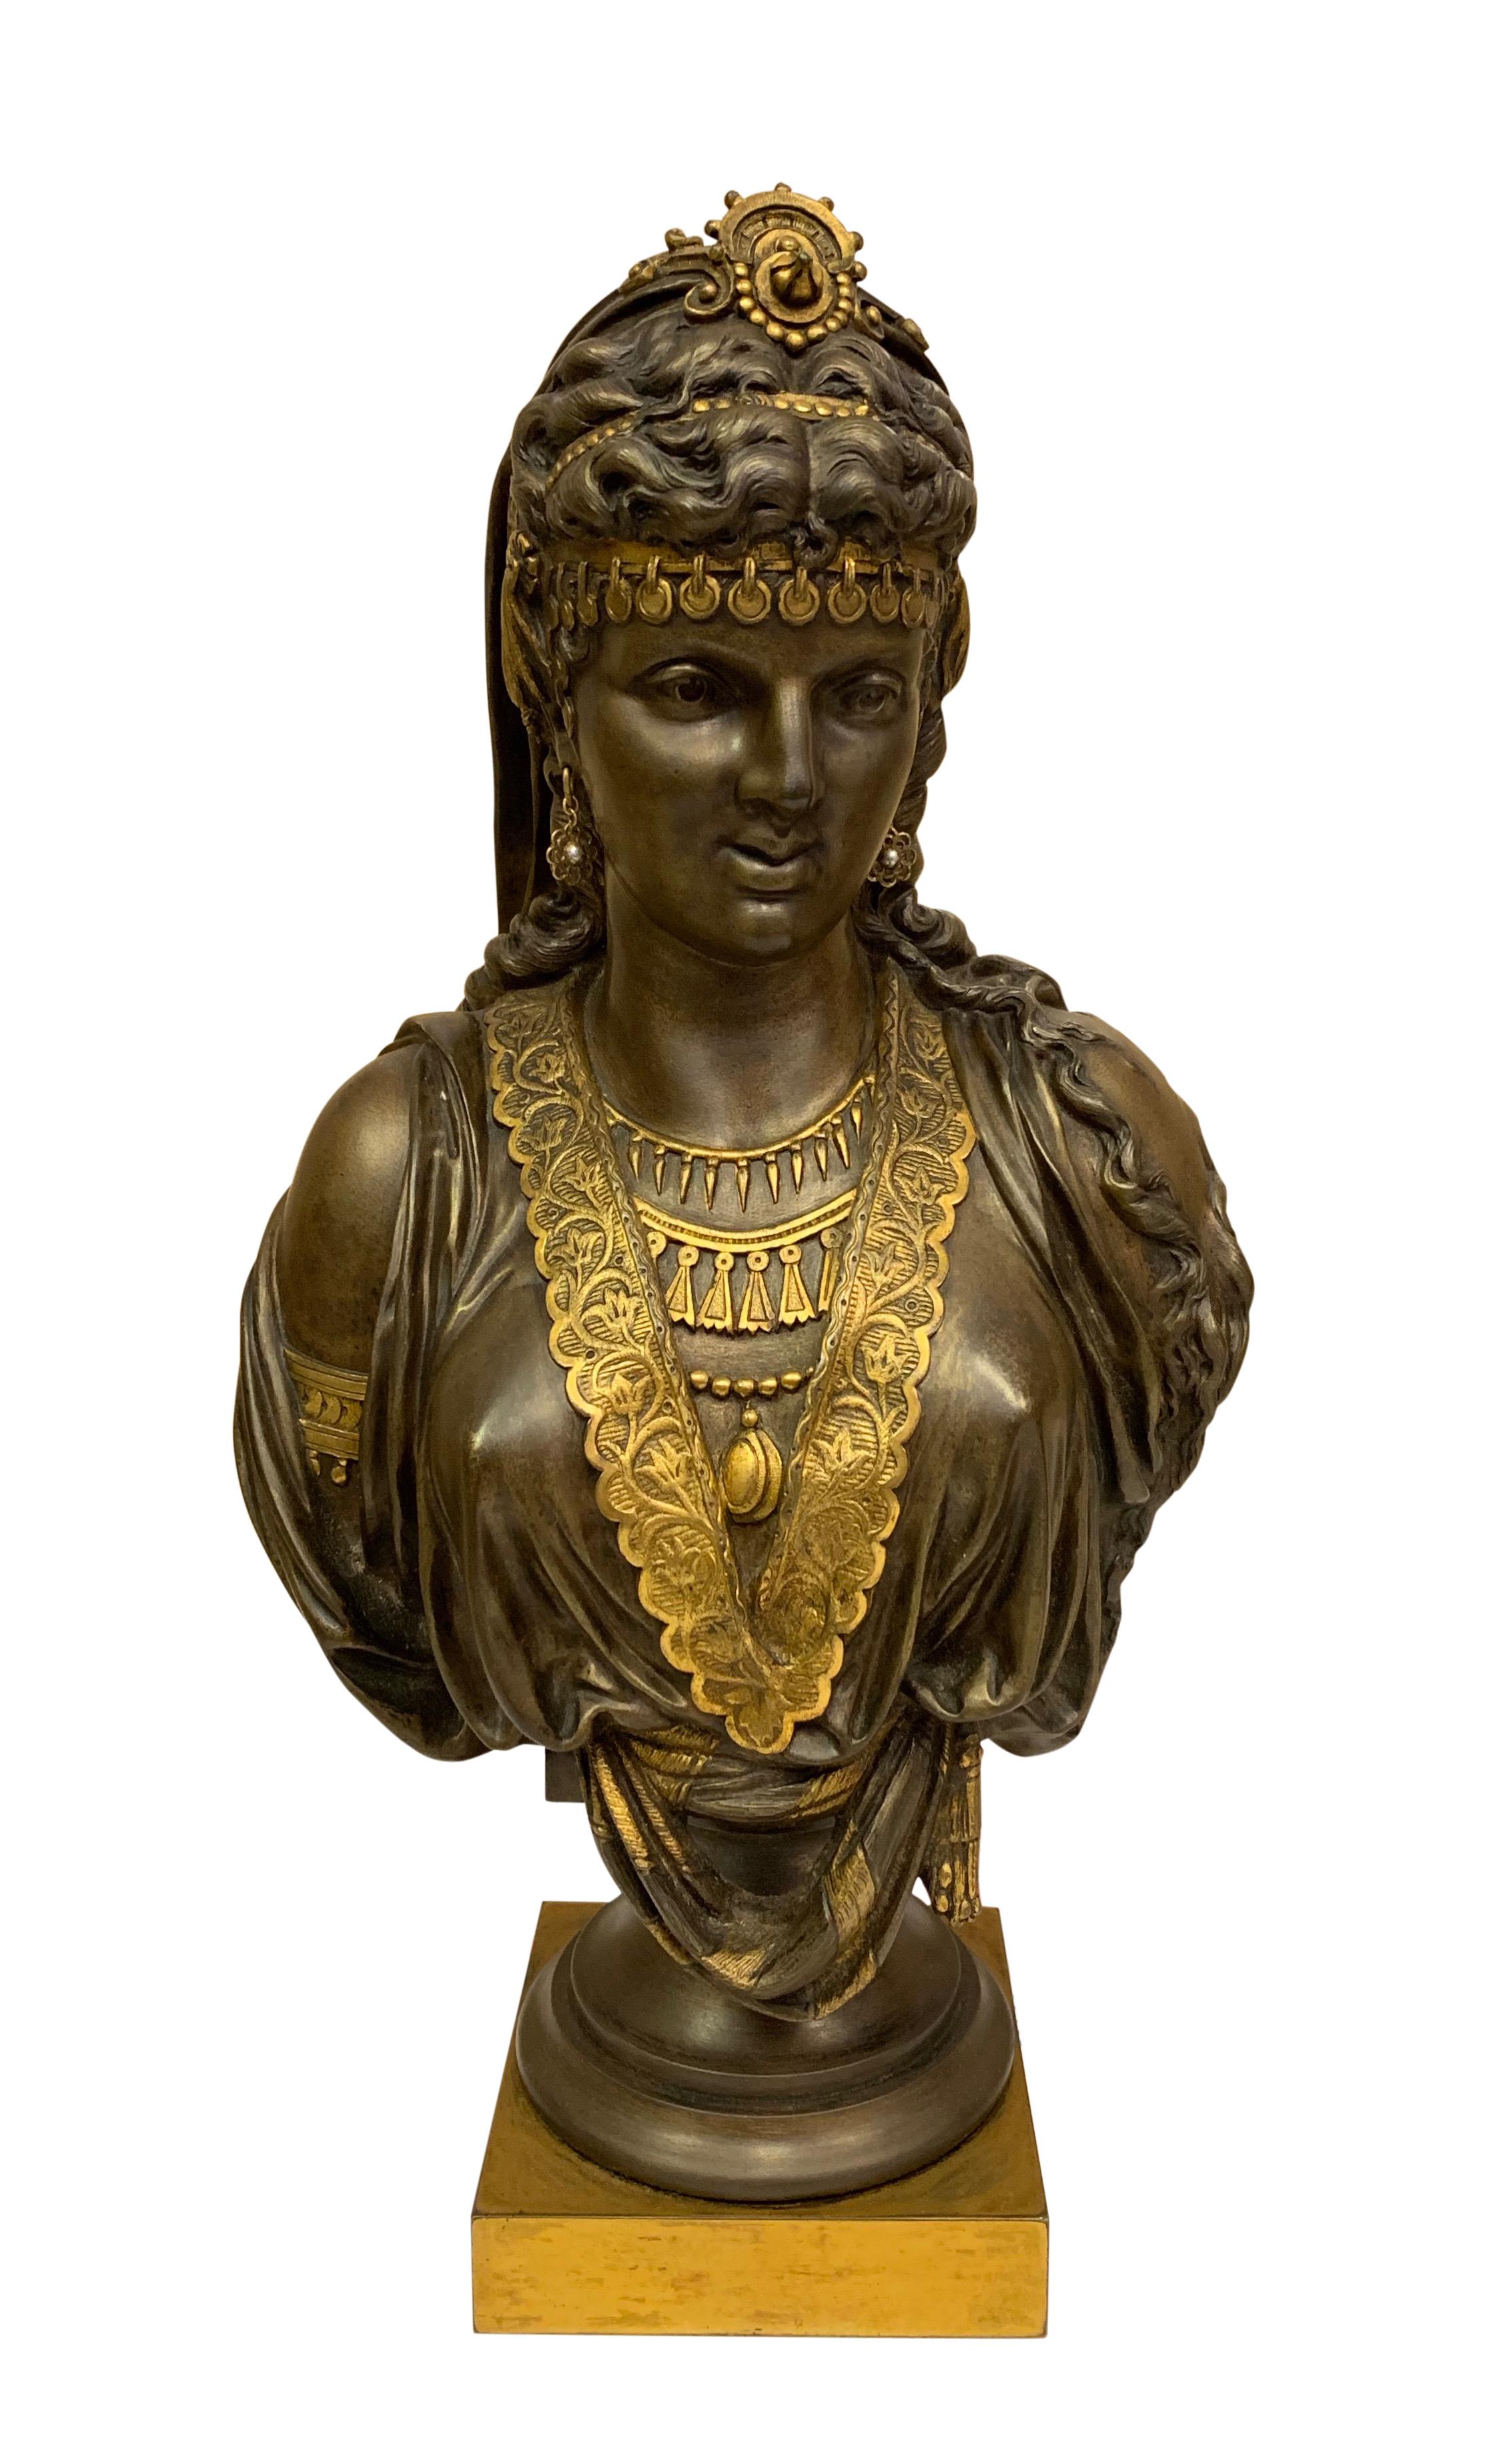 A pair of superb quality 19th century gilt and patinated bronze orientalist busts. Each young lady dressed in traditional middle eastern attire wearing beaded necklaces and earrings,

circa 1860

Dimensions
Height 14